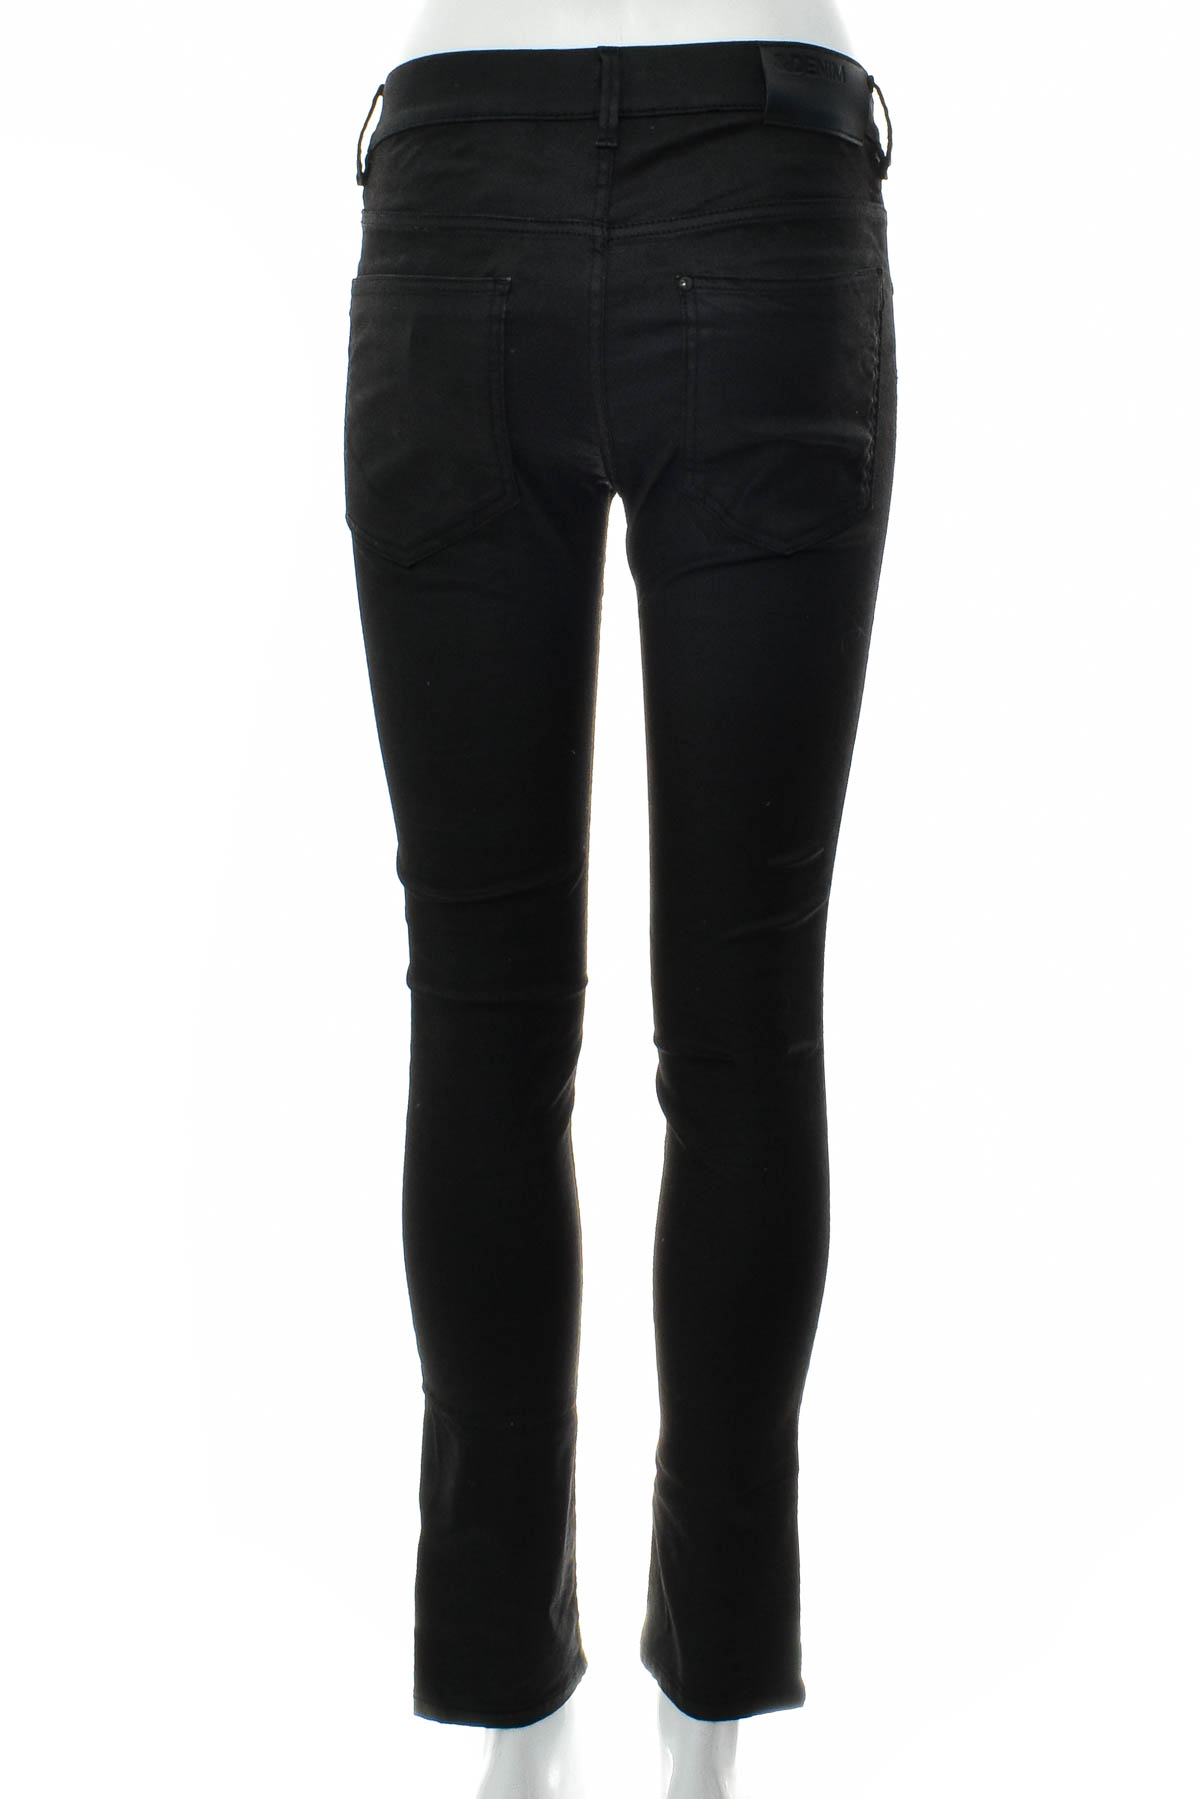 Trousers for girl - H&M - 1